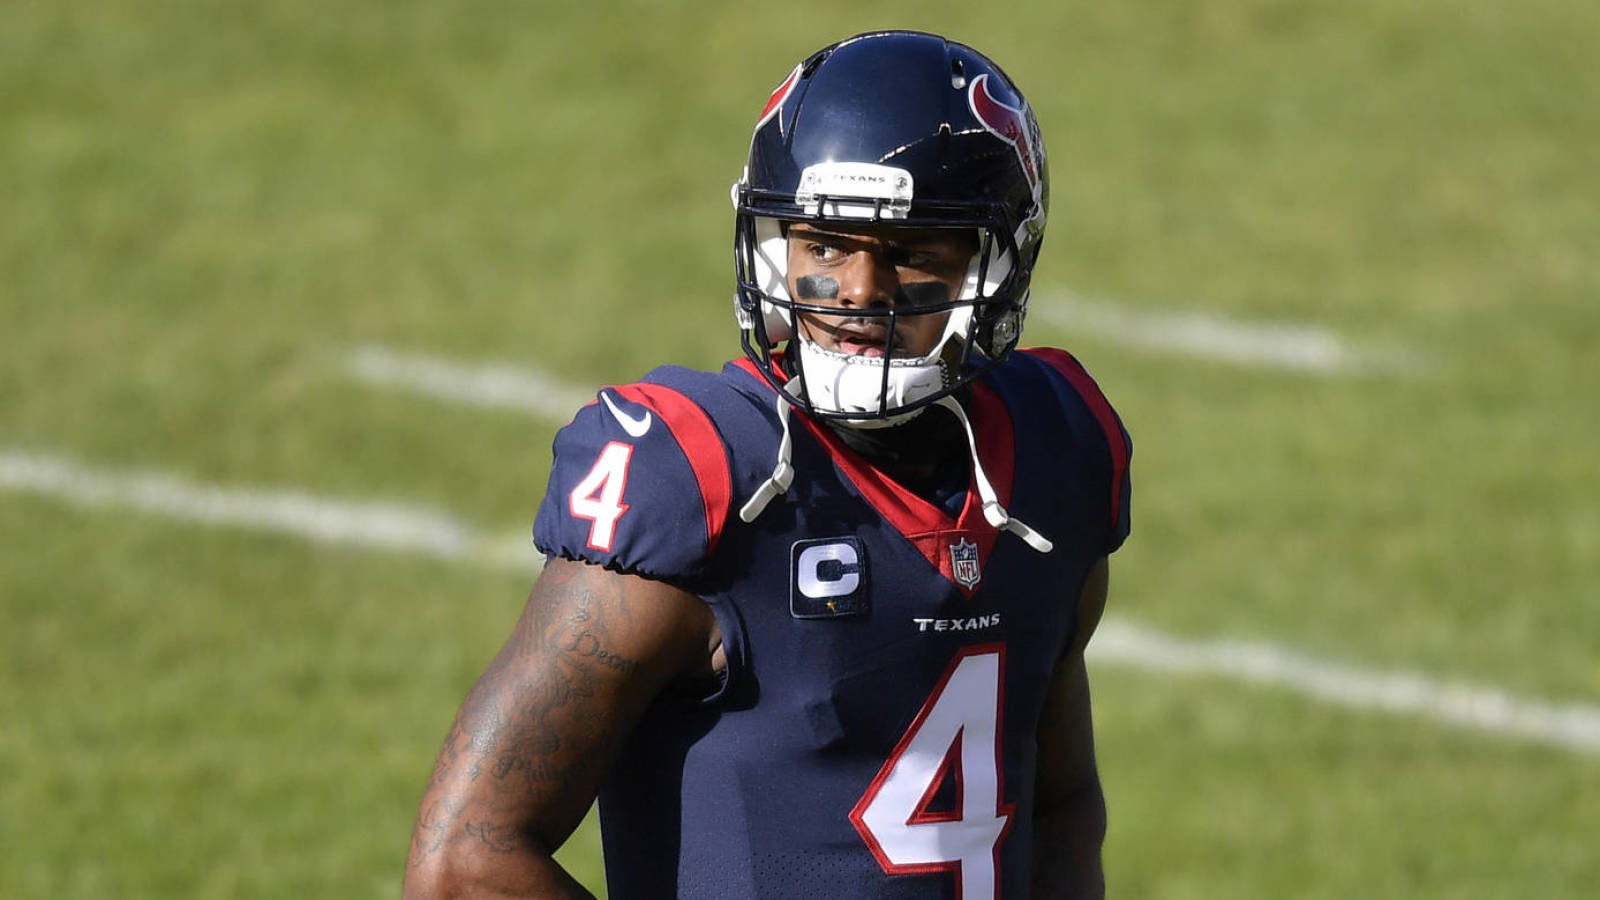 Texans' Anthony Miller on Deshaun Watson: 'The show must go on'